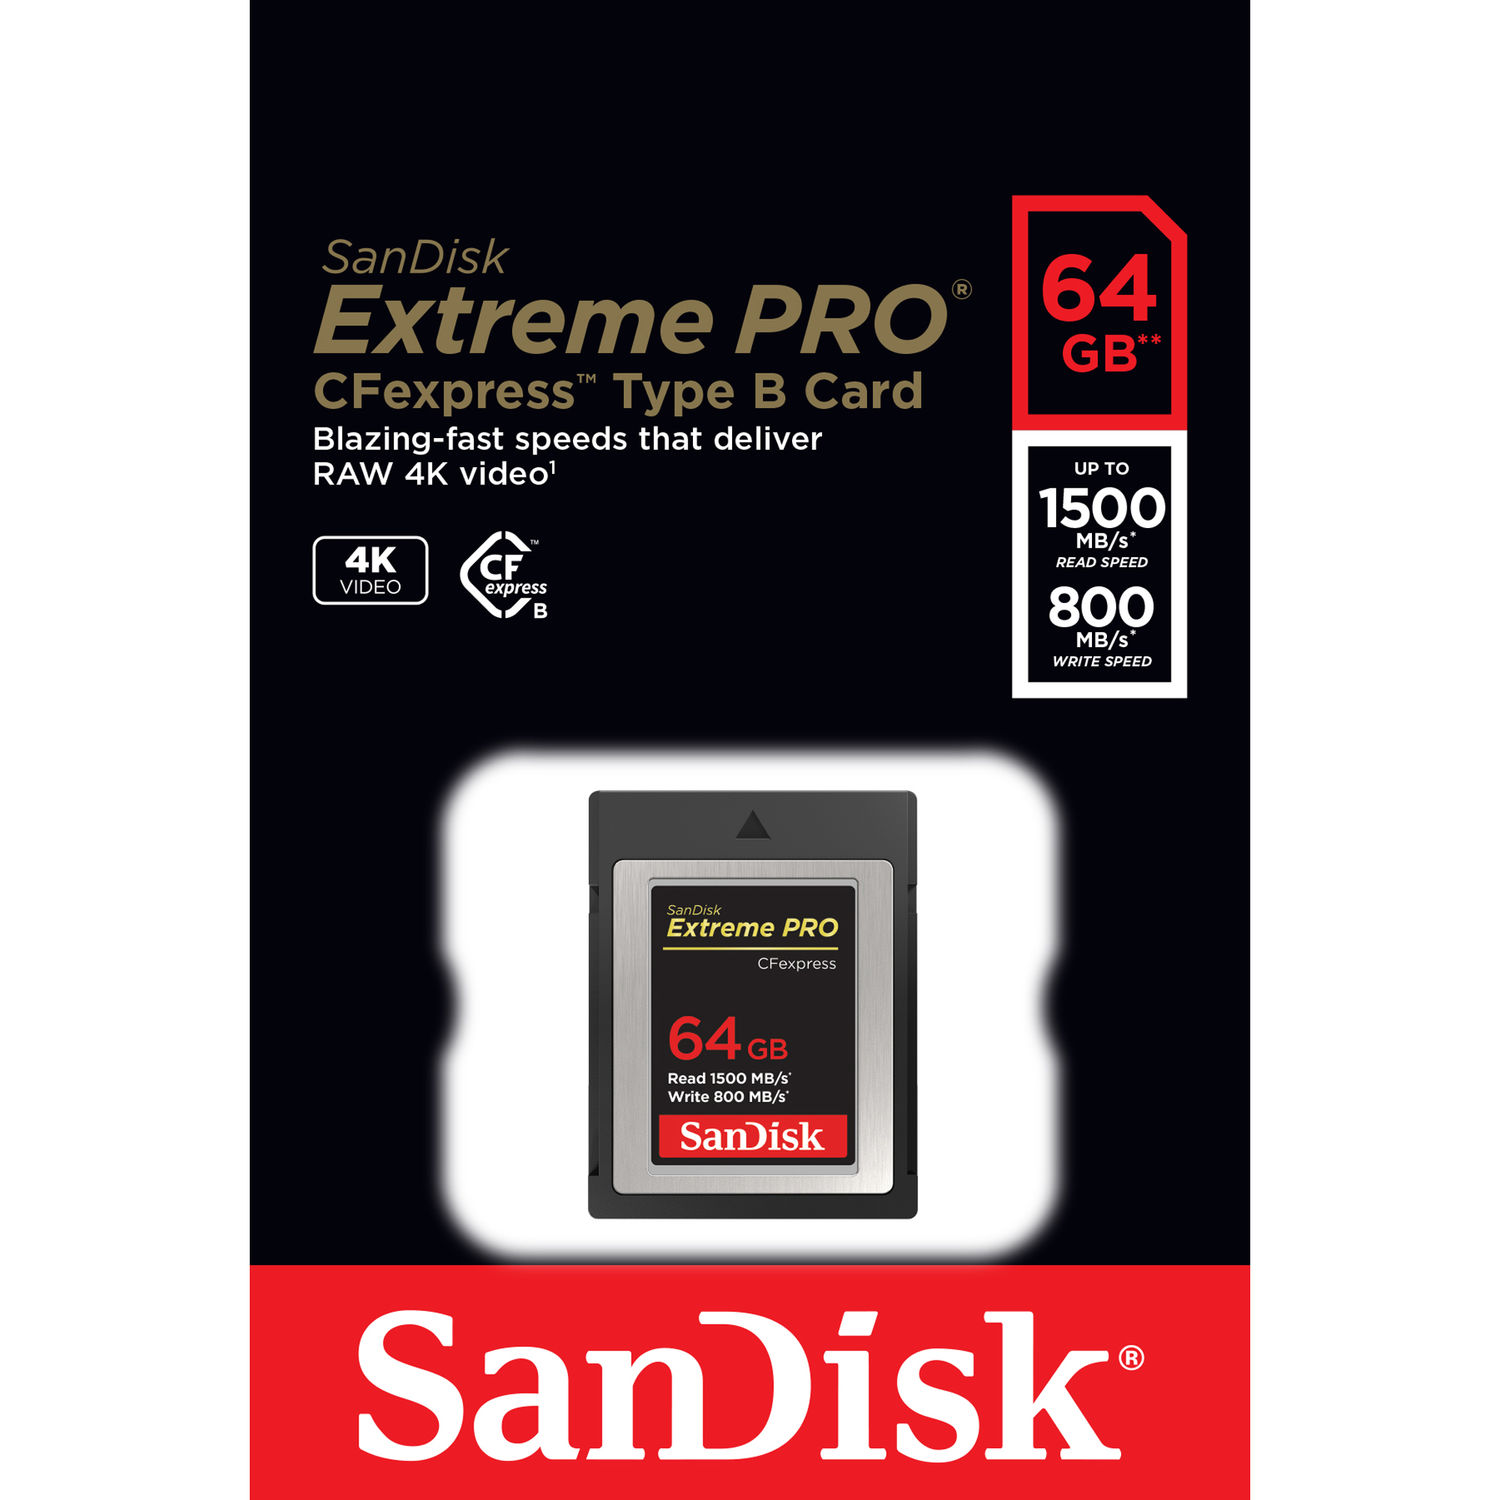 SanDisk Carte CFexpress Extreme Pro 64GB 1500/800Mb/s